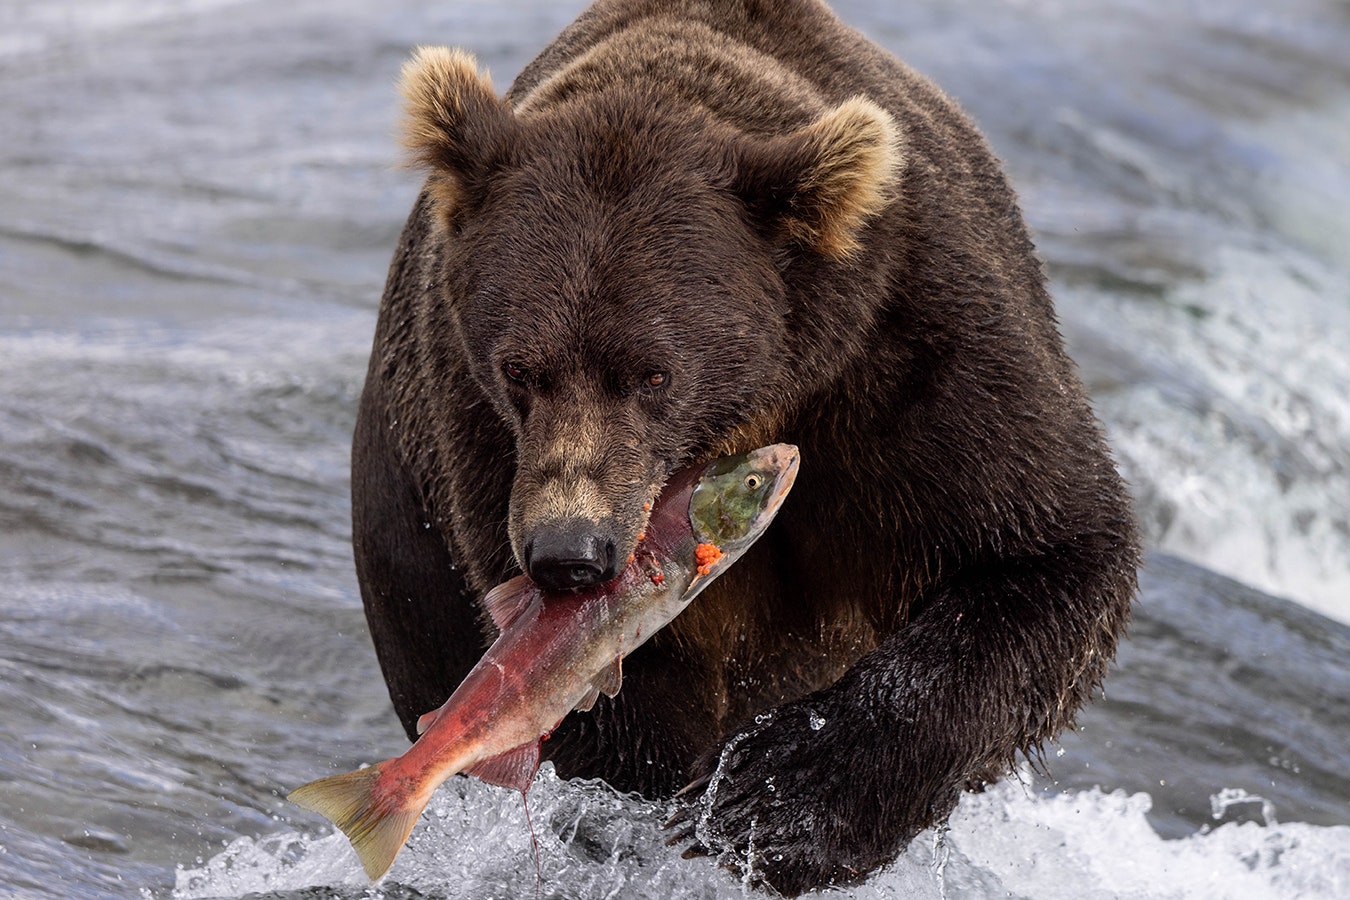 A brown bear in Katmai National Park walking through the Brooks River with a sockeye salmon after a successful catch. This bear had been fishing unsuccessfully for quite a while before he finally caught a fish and proudly carried it to shore to eat before returning to his fishing spot.